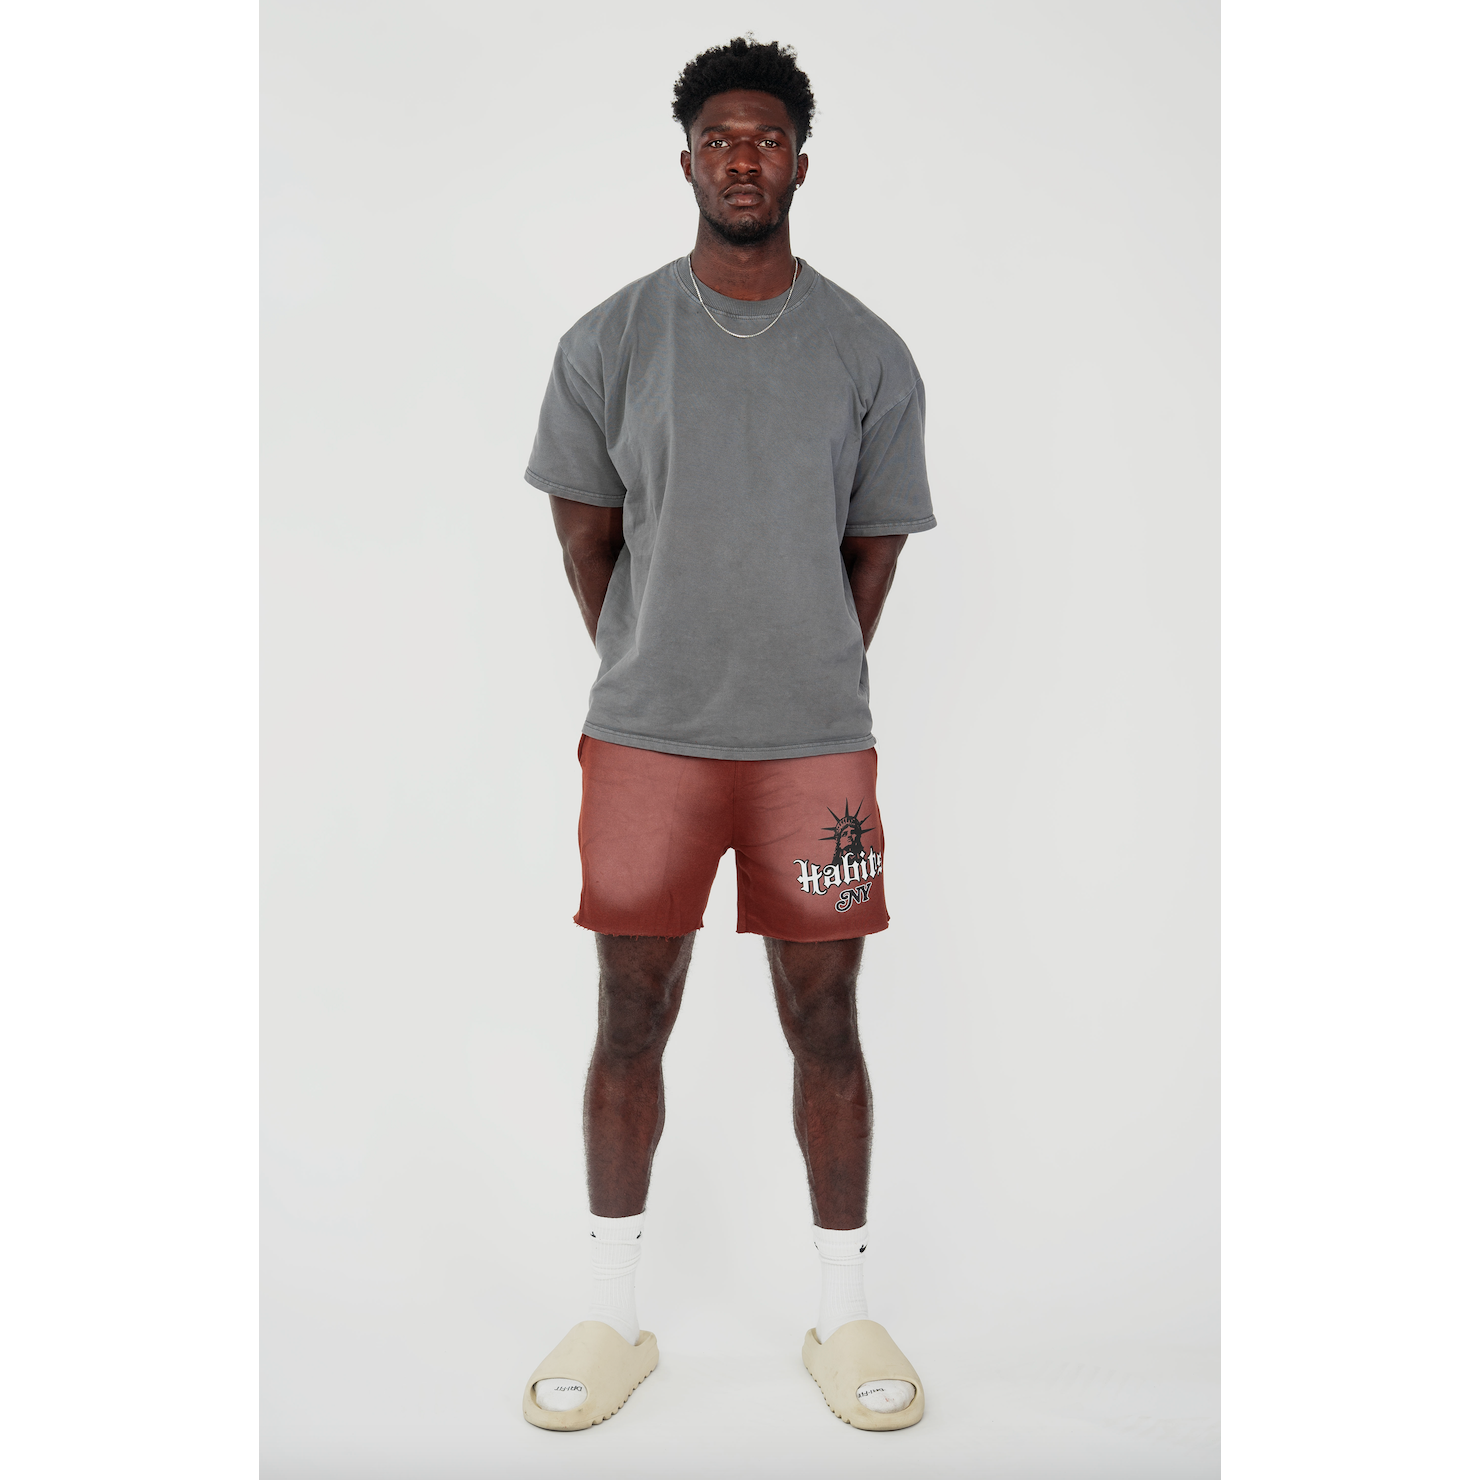 Brown 2.0 Empire State Shorts